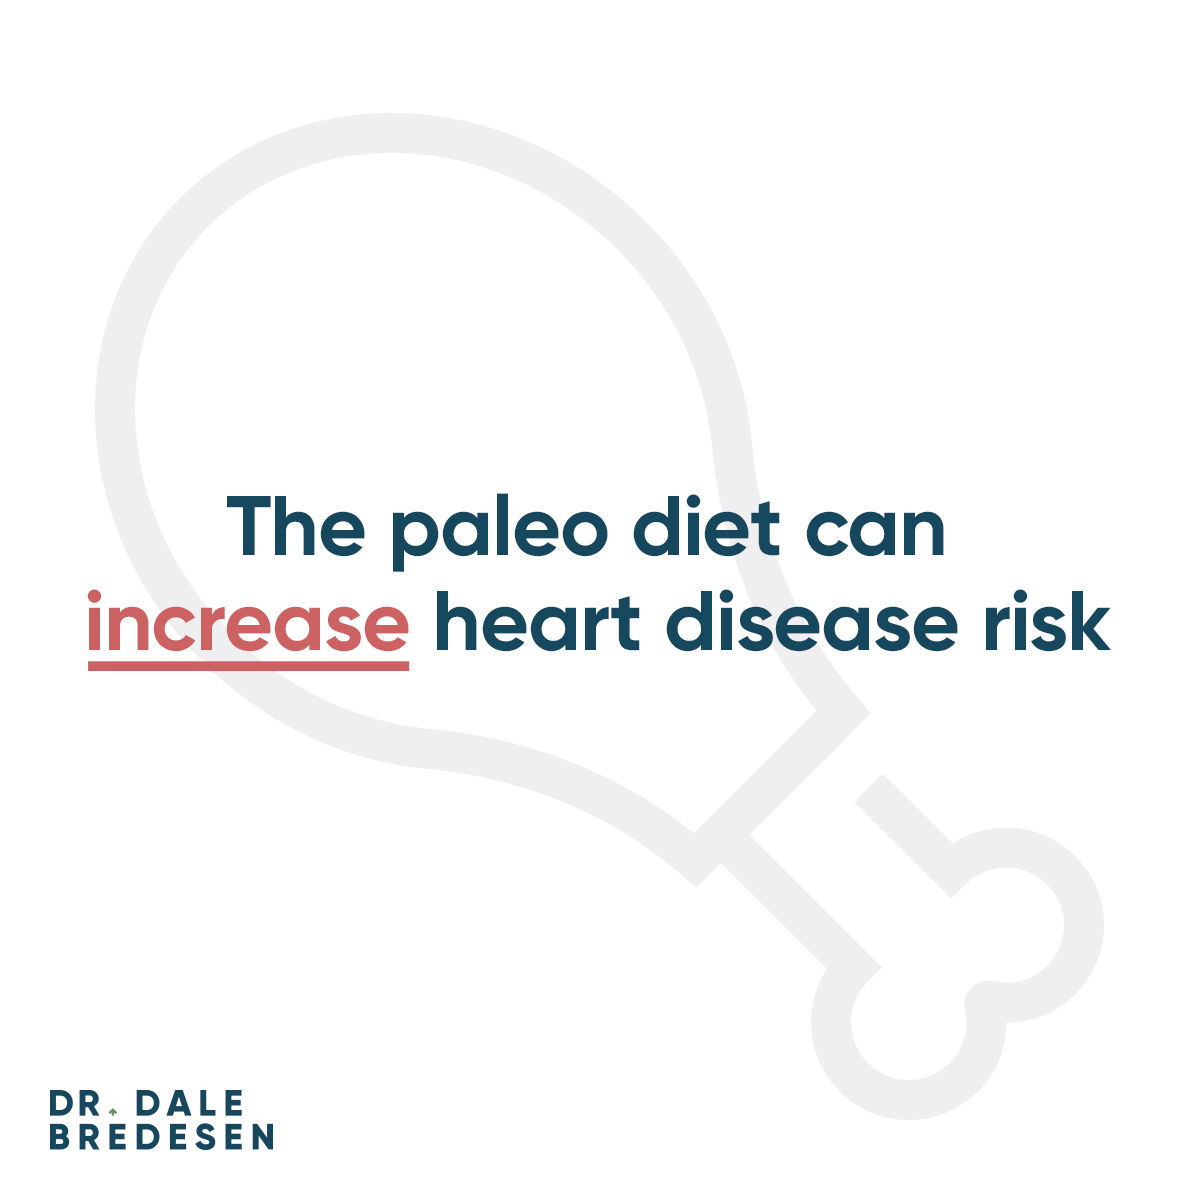 Research shows that paleo dieters have increased levels of a biomarker associated with major cardiovascular episodes and death. KetoFLEX 12/3 overcomes these risks by promoting metabolic flexibility with a veggie-centered diet. healthline.com/health-news/pa…